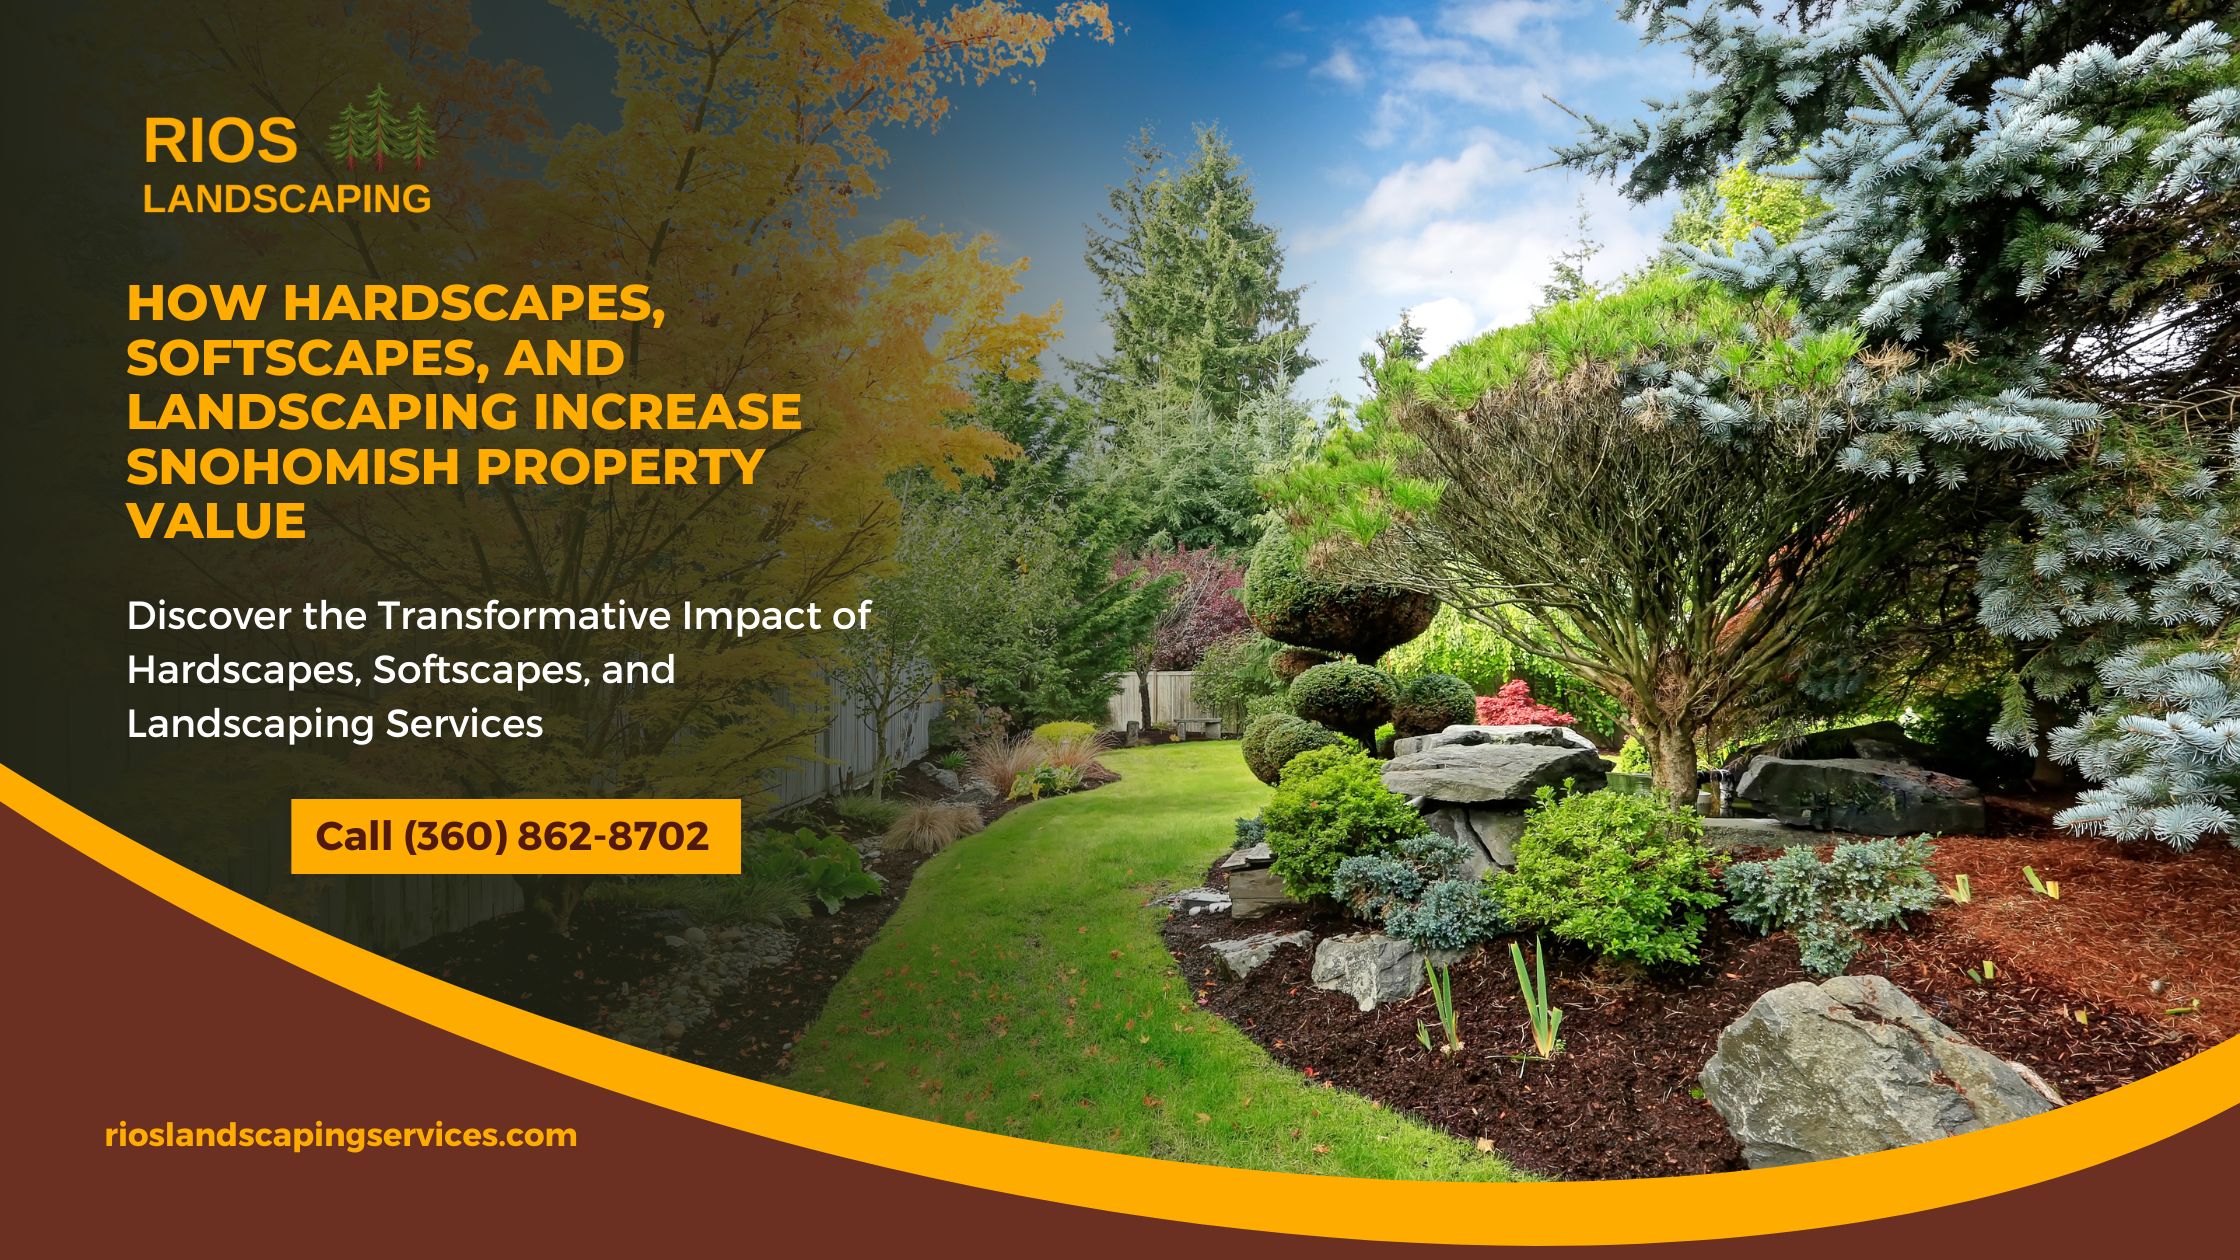 How Hardscapes, Softscapes, and Landscaping Increase Snohomish Property Value